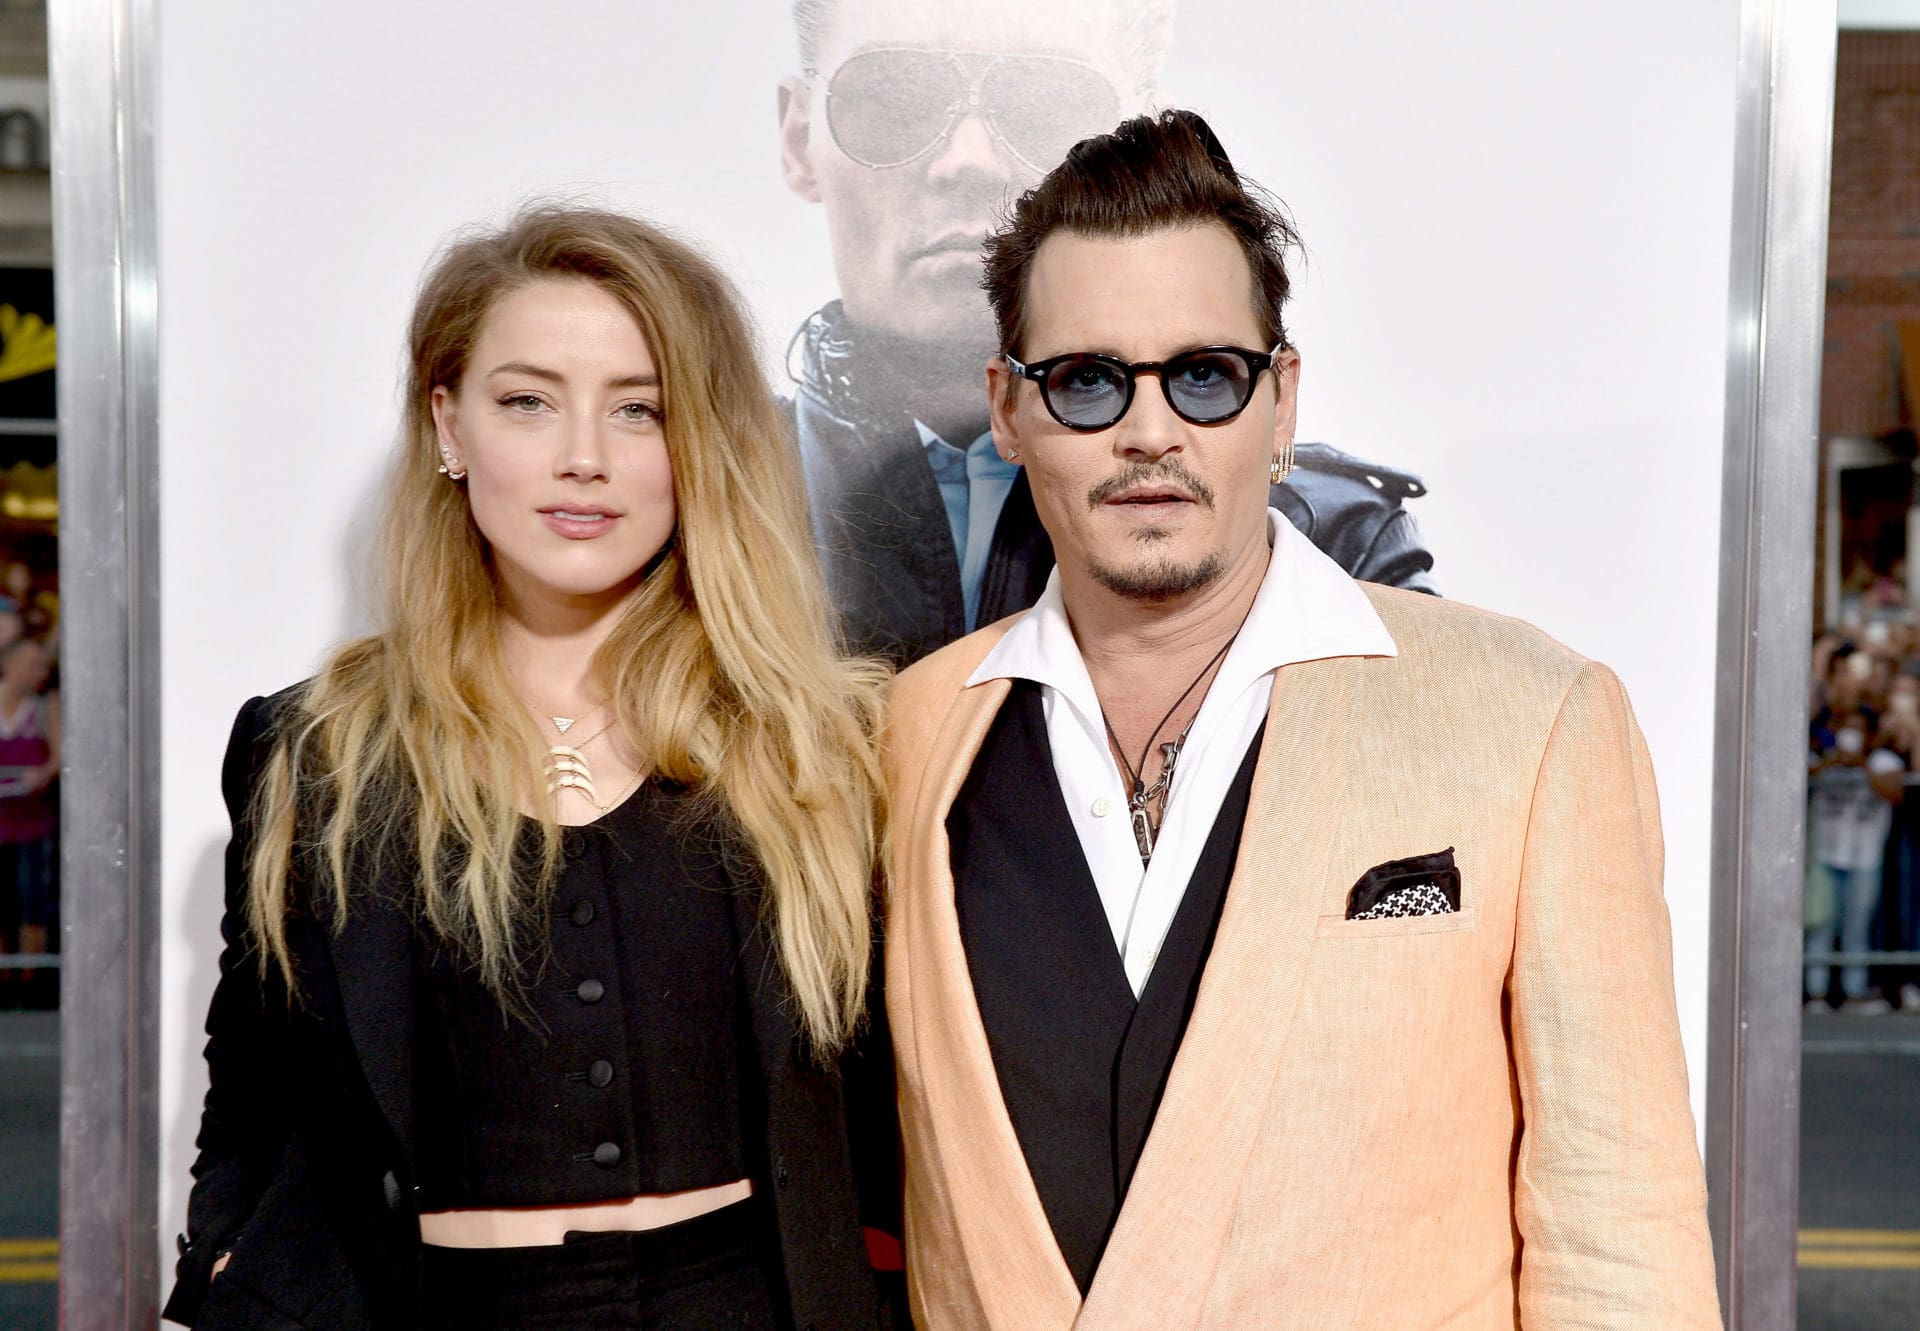 ”dc-films-president-denies-any-influence-of-court-trial-between-amber-heard-and-johnny-depp-on-upcoming-aquaman-2”